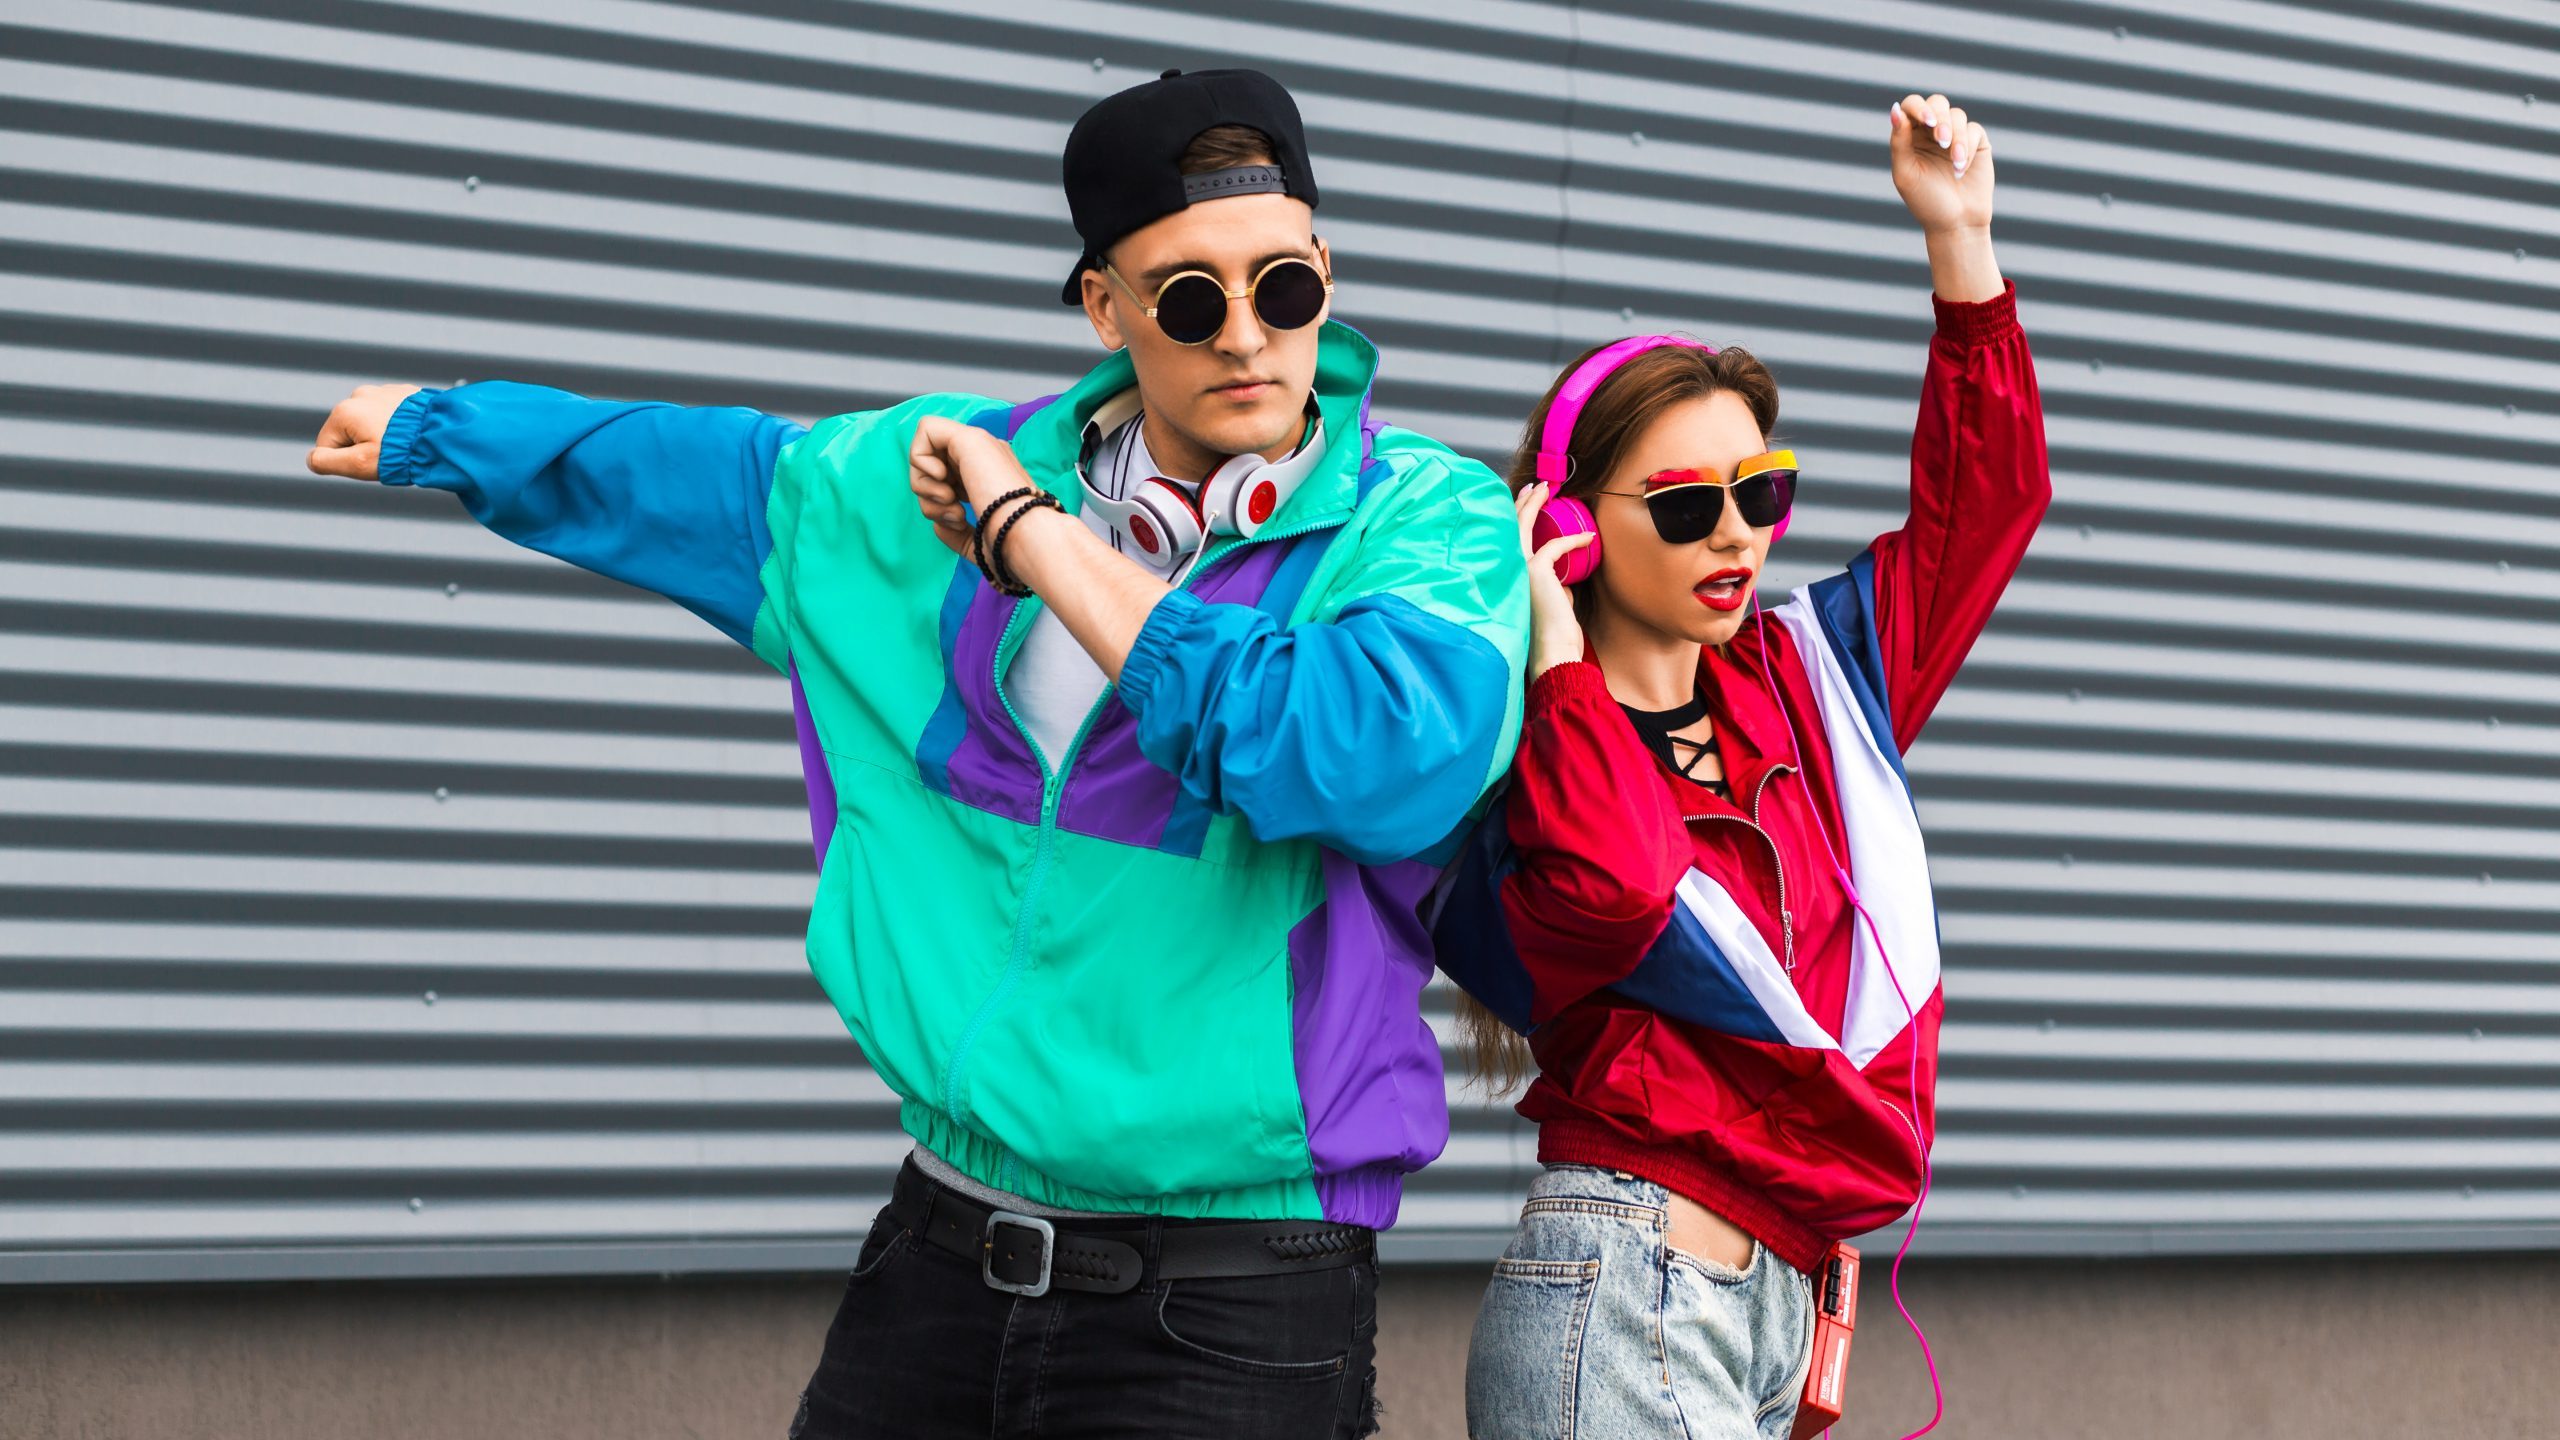 21 '90s Fashion Trends Making A Comeback In 2023 | lupon.gov.ph